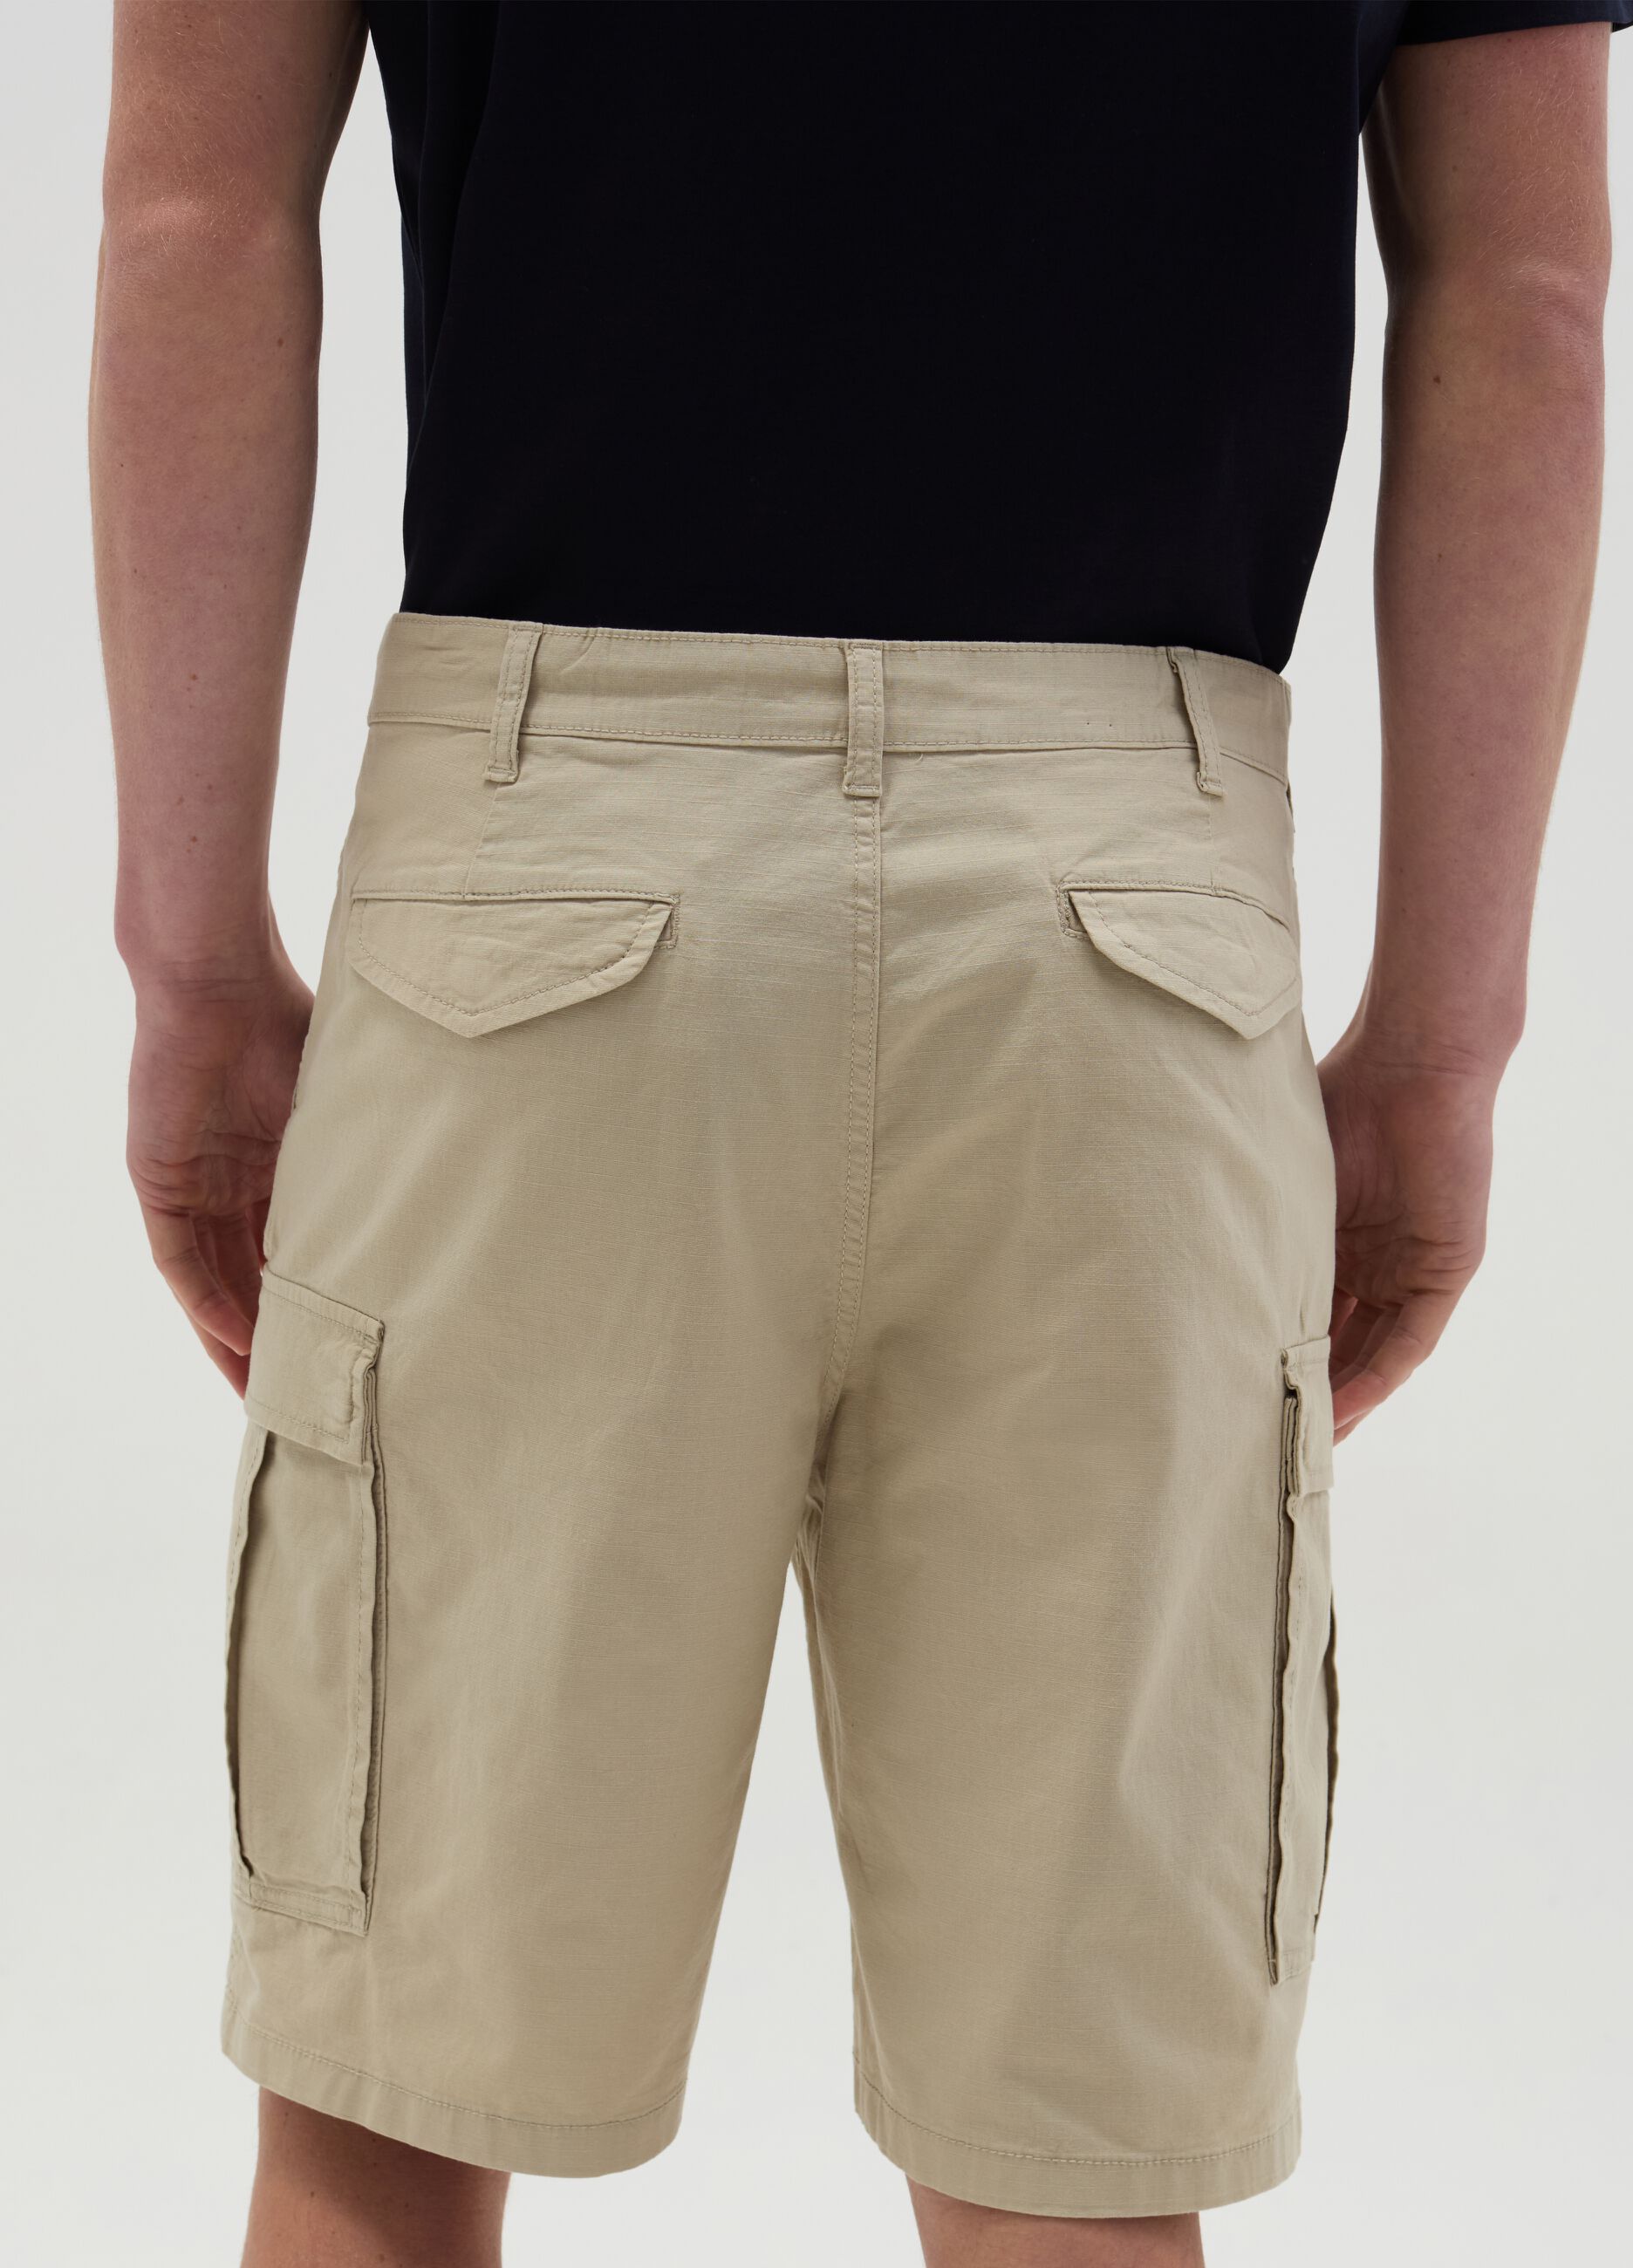 Stretch cargo Bermuda shorts with ripstop weave